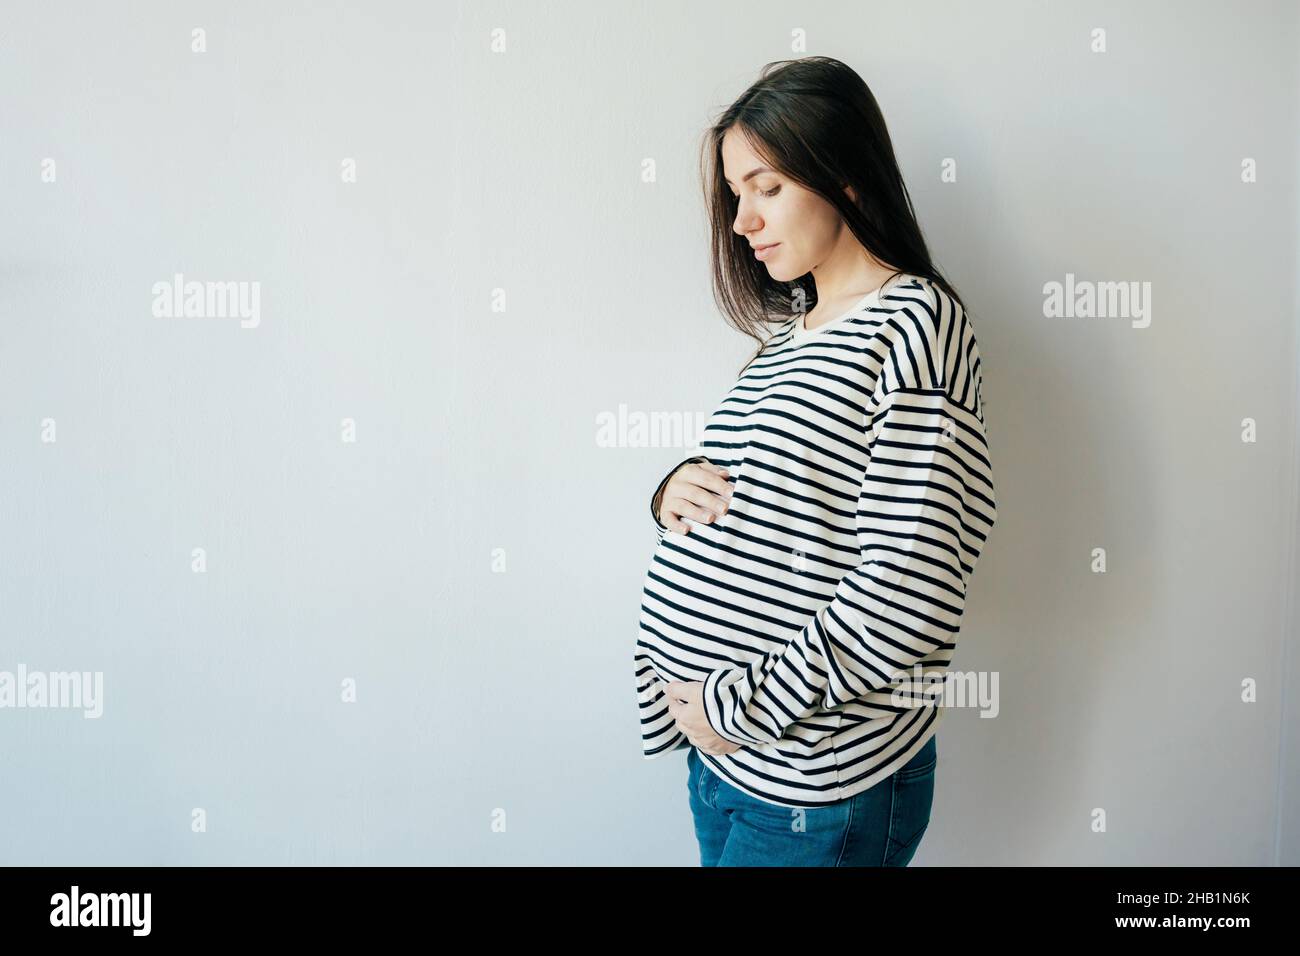 Tender young pregnant woman in a striped sweatshirt against the background of a white wall. Stock Photo